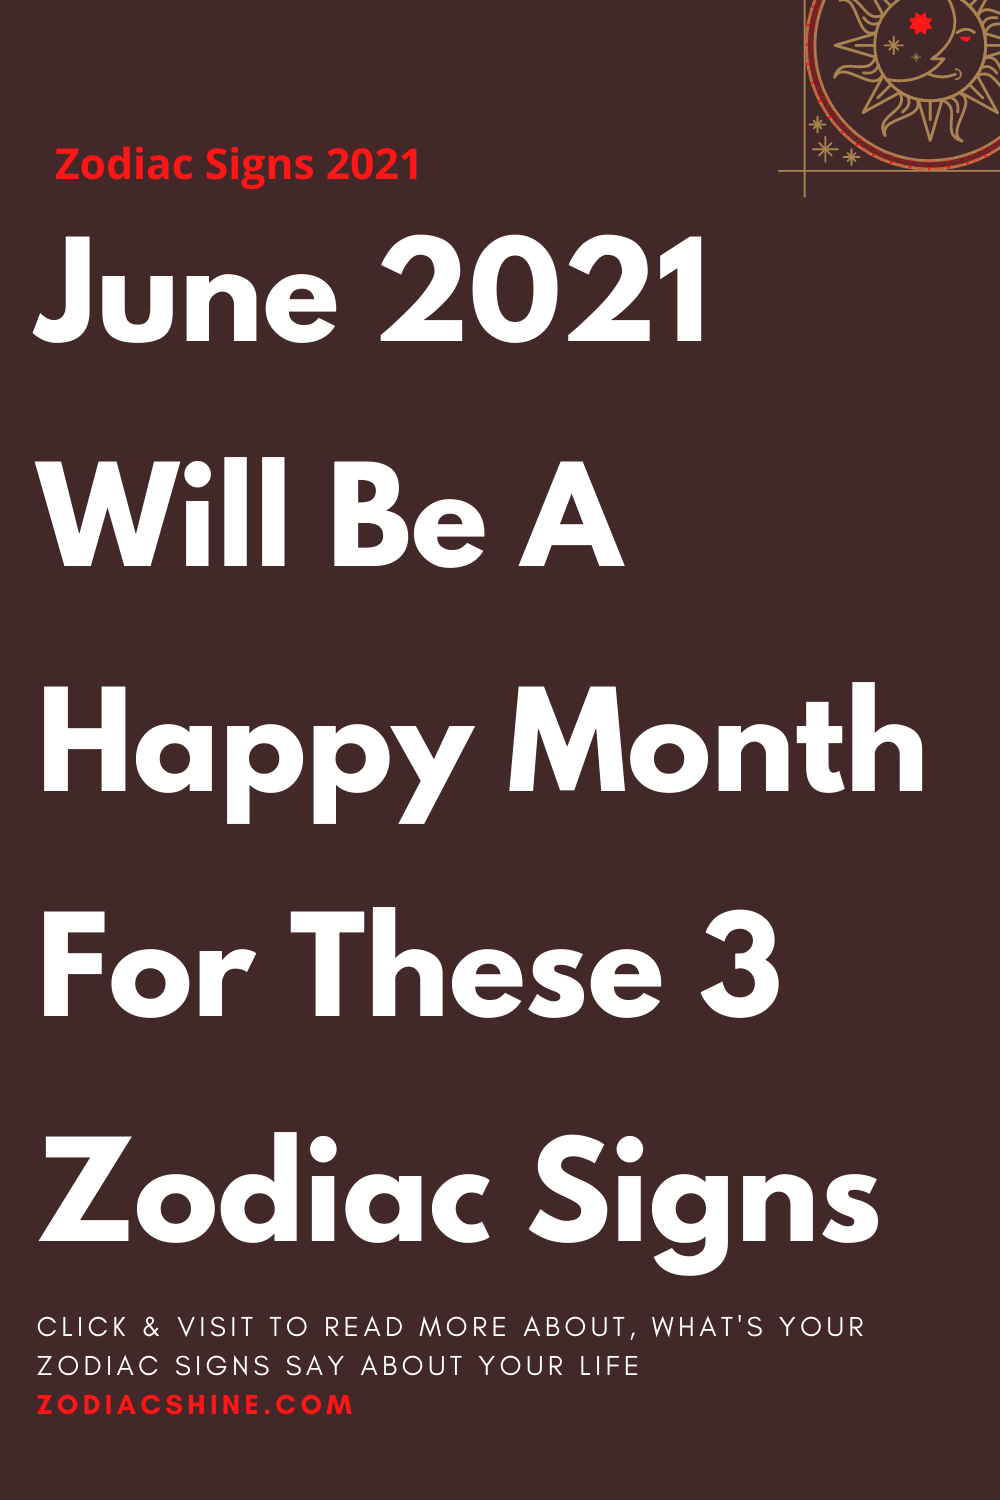 June 2021 Will Be A Happy Month For These 3 Zodiac Signs